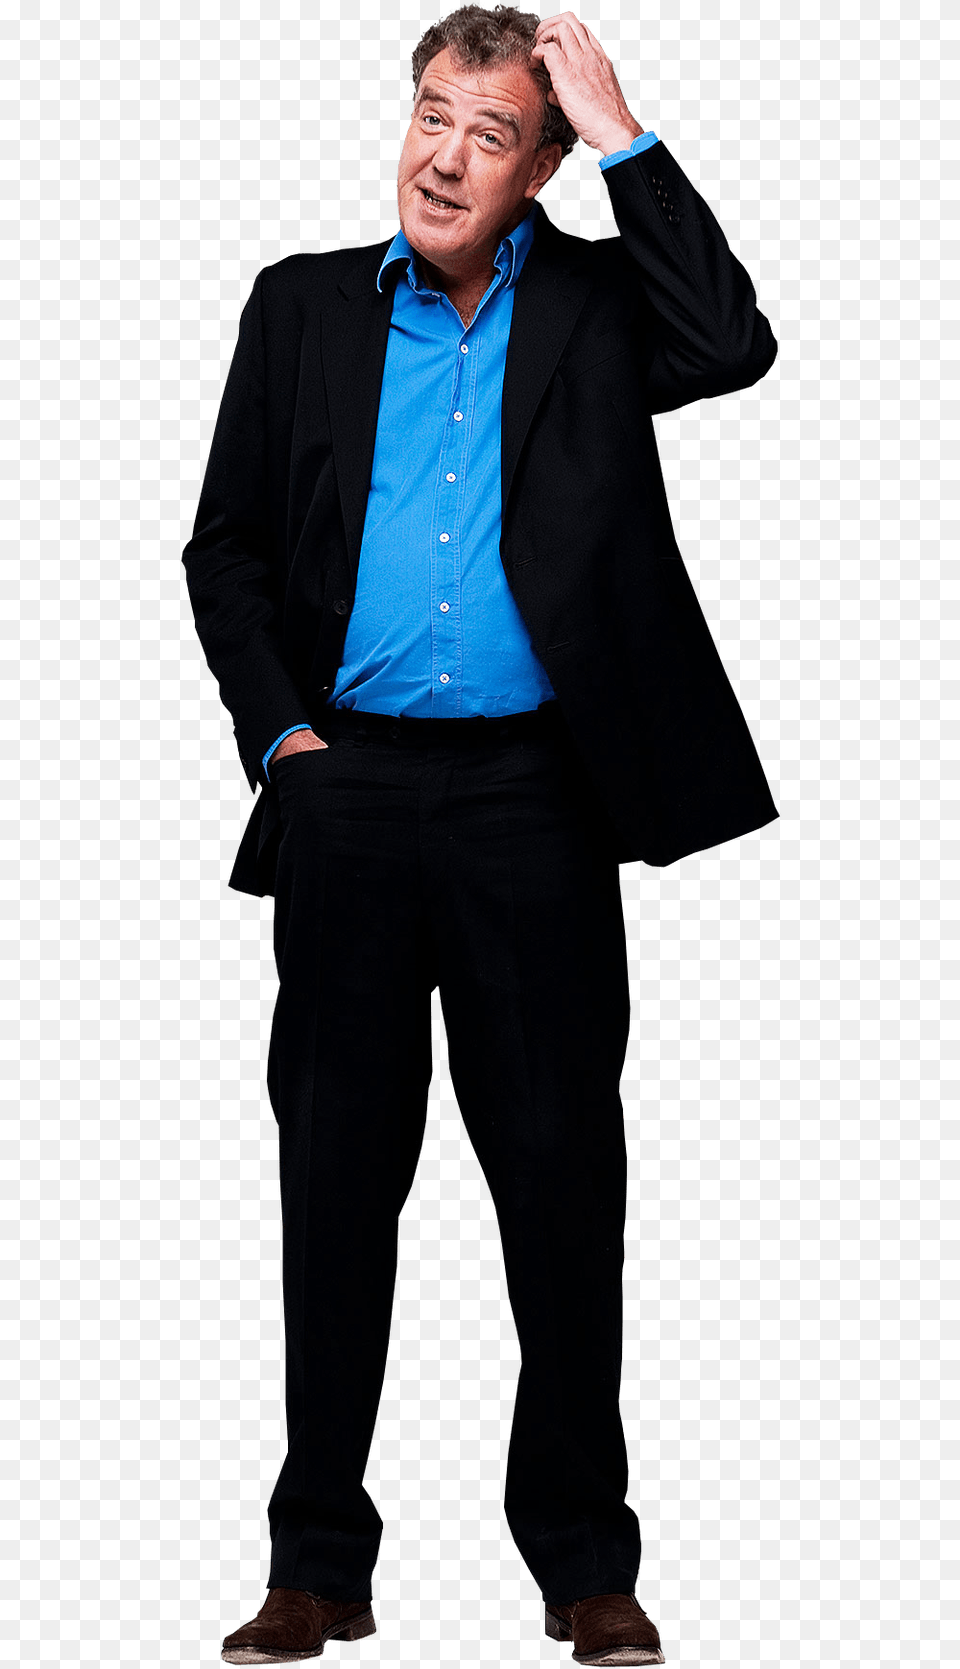 Download People Images Different Of And Jeremy Clarkson Transparent Background, Long Sleeve, Formal Wear, Jacket, Sleeve Png Image